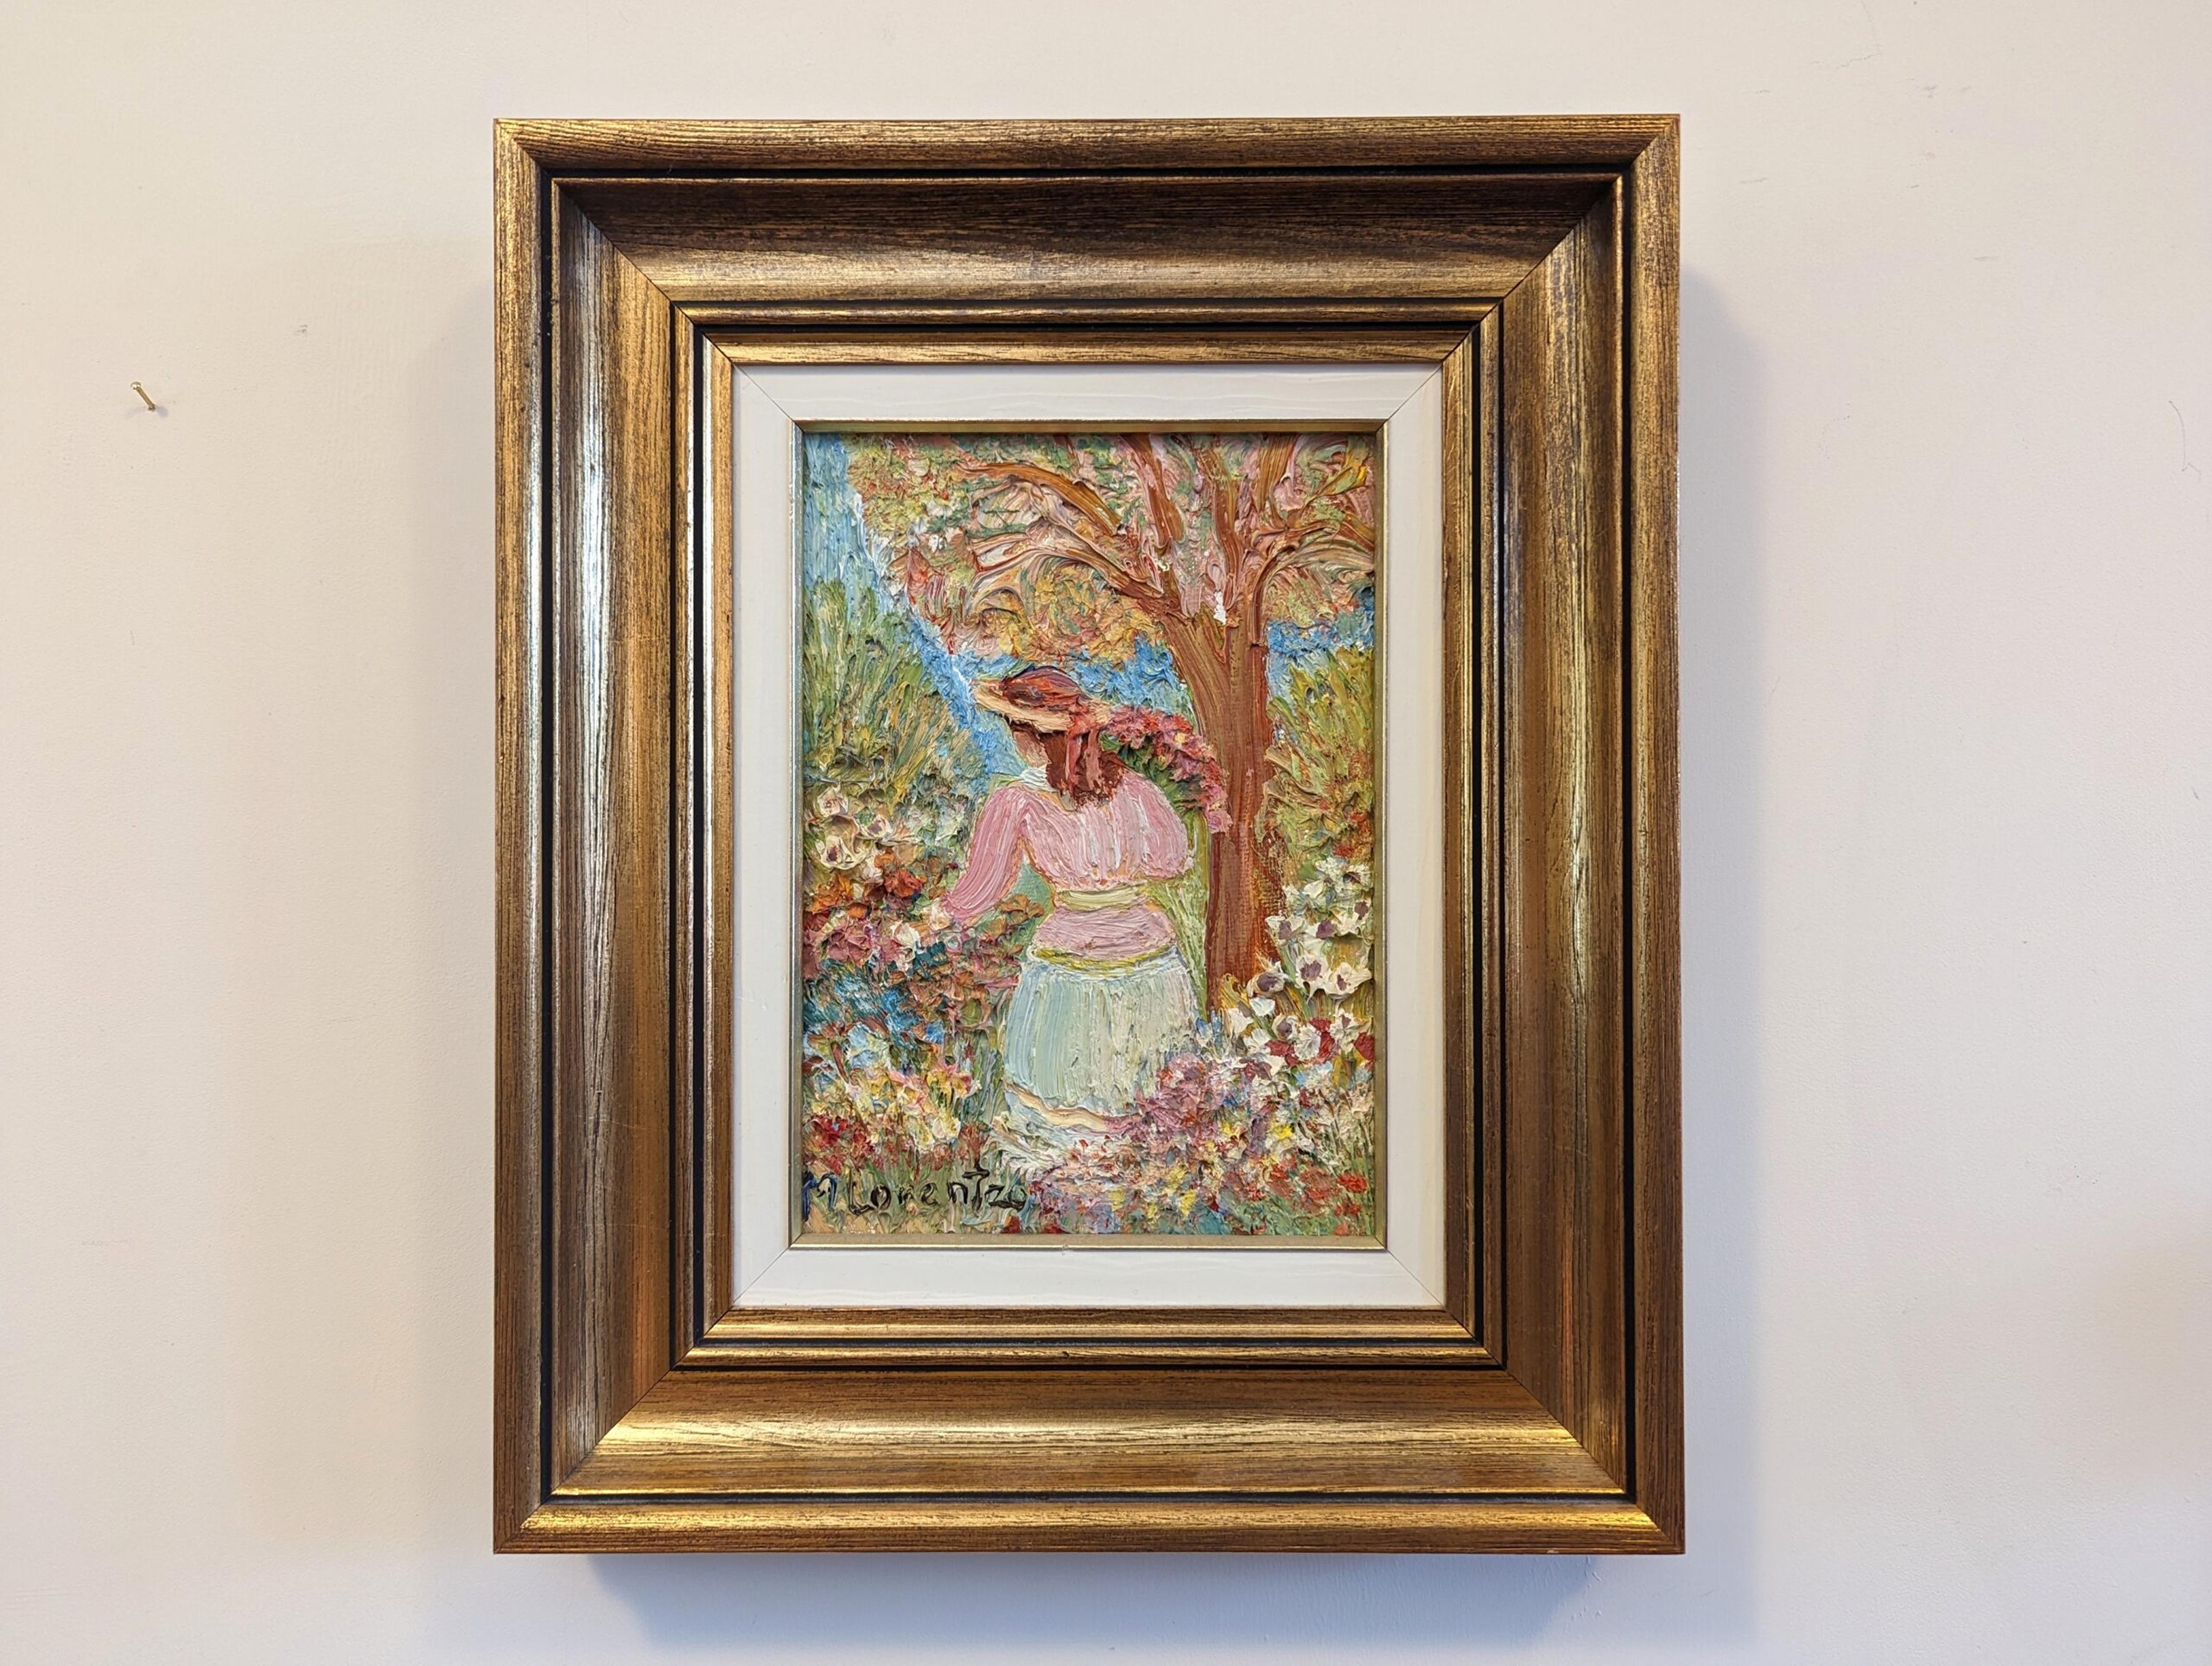 GIRL IN THE GARDEN
Size:  35.5 x 30 cm (including frame)
Oil on Canvas

A richly textured and charming mid-century figurative painting, executed in oil onto canvas.

Small yet impactful in its composition, the painting portrays a poised young lady